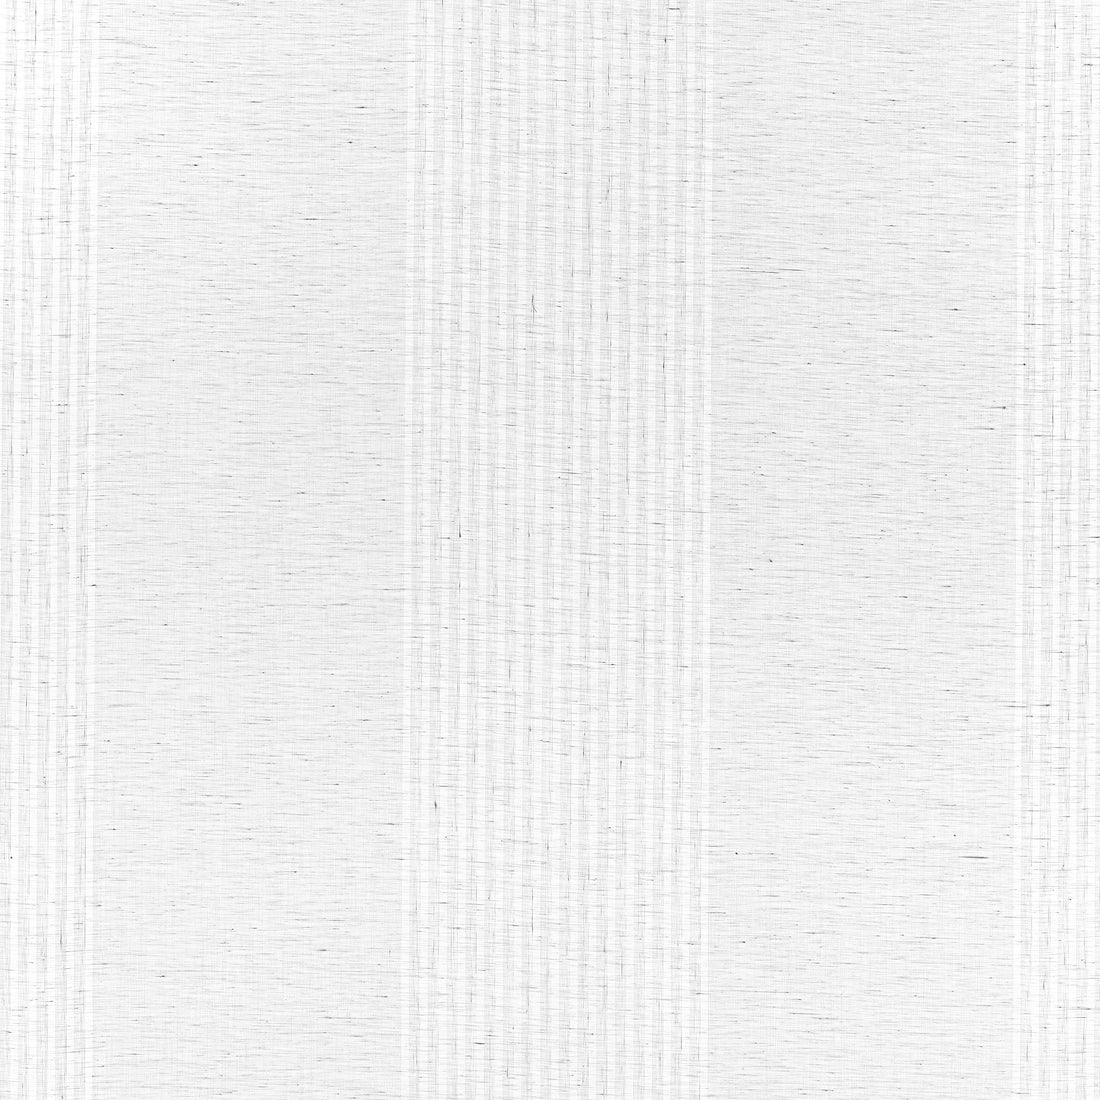 Mystic Stripe fabric in snow white color - pattern number FWW7111 - by Thibaut in the Atmosphere collection